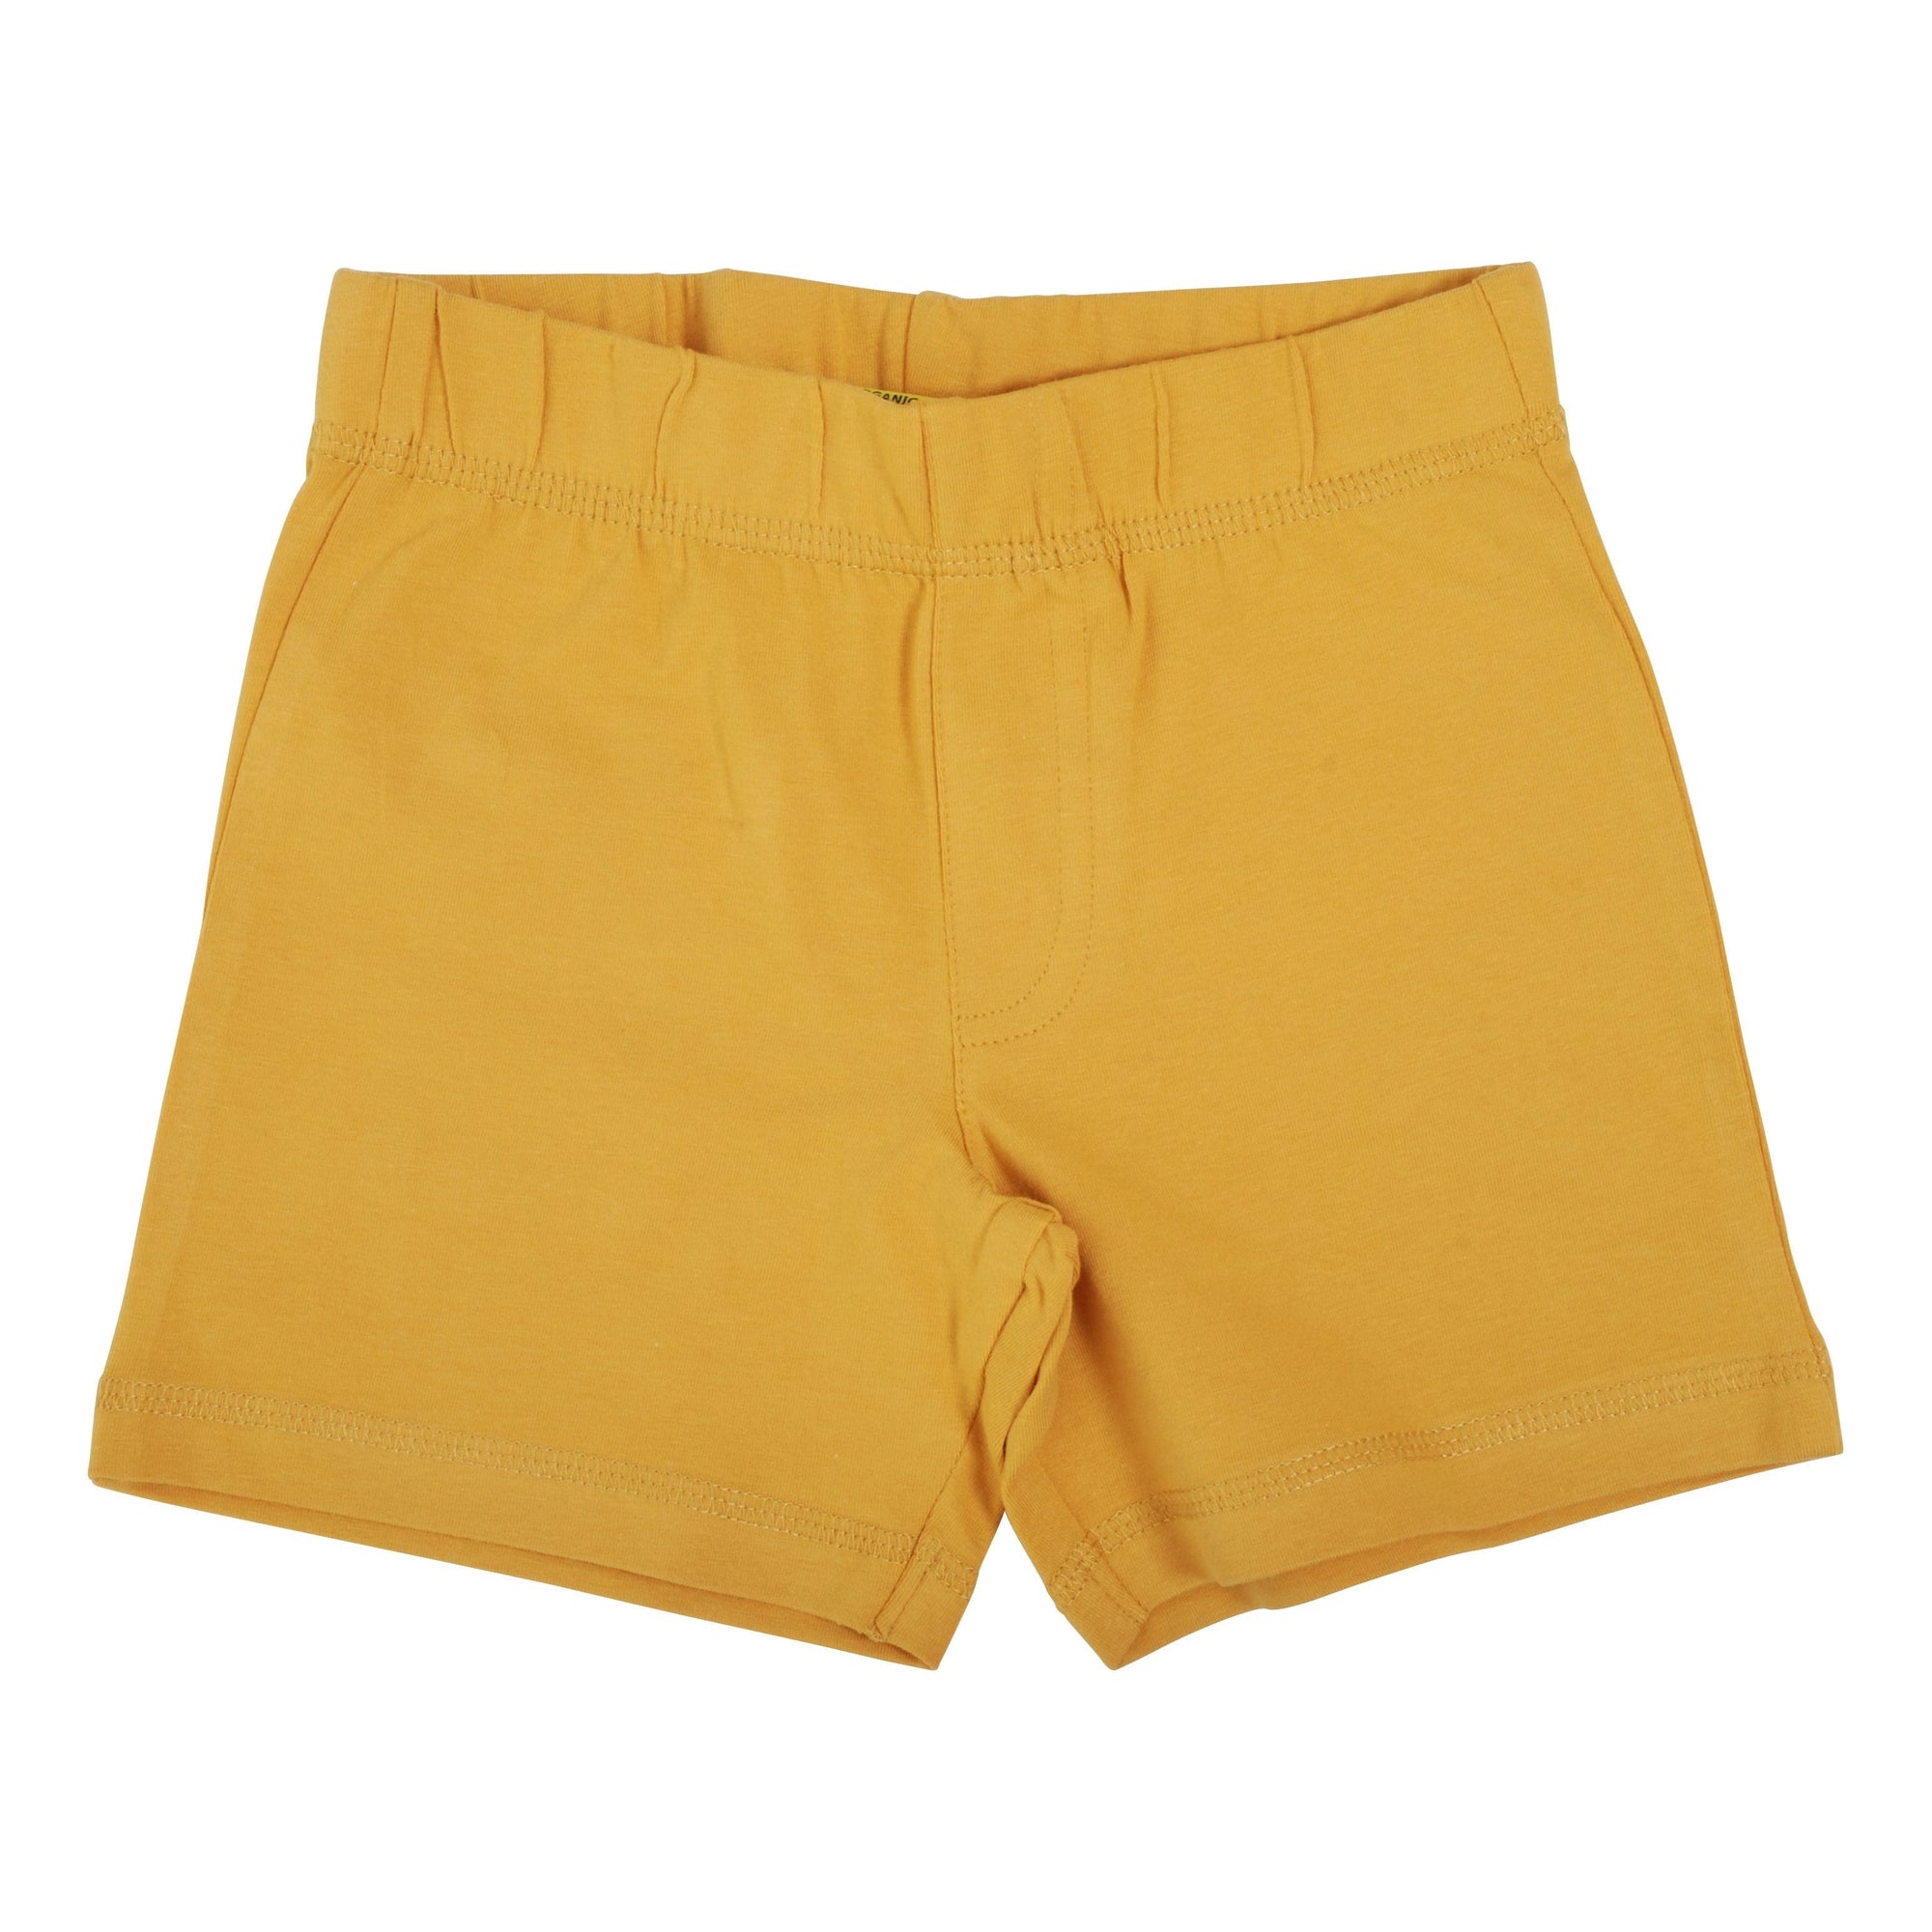 Honey Gold Shorts - 1 Left Size 10-12 years-More Than A Fling-Modern Rascals